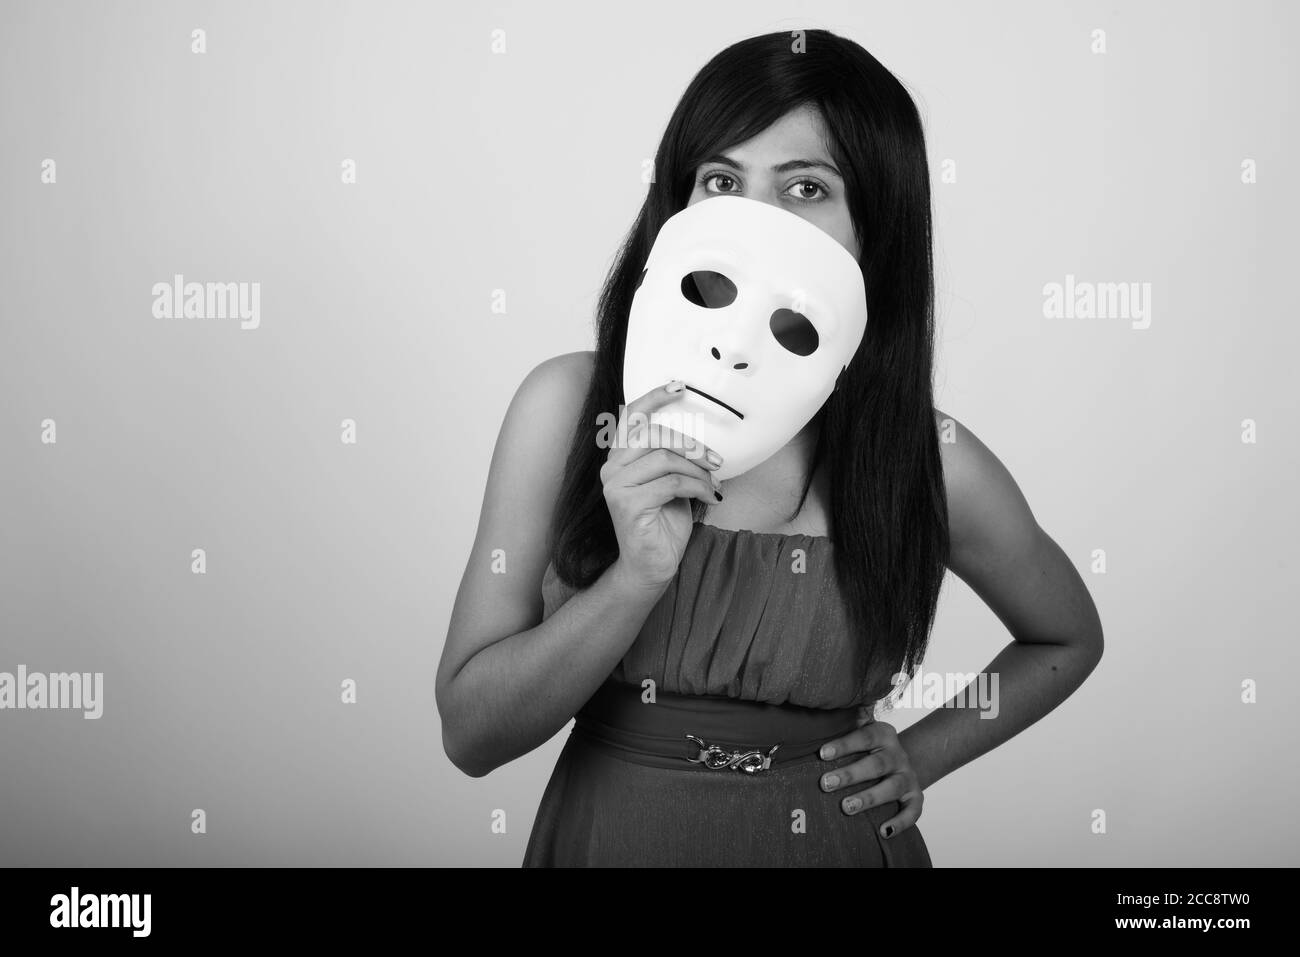 Studio shot of young Persian woman covering face with white mask against gray background Stock Photo